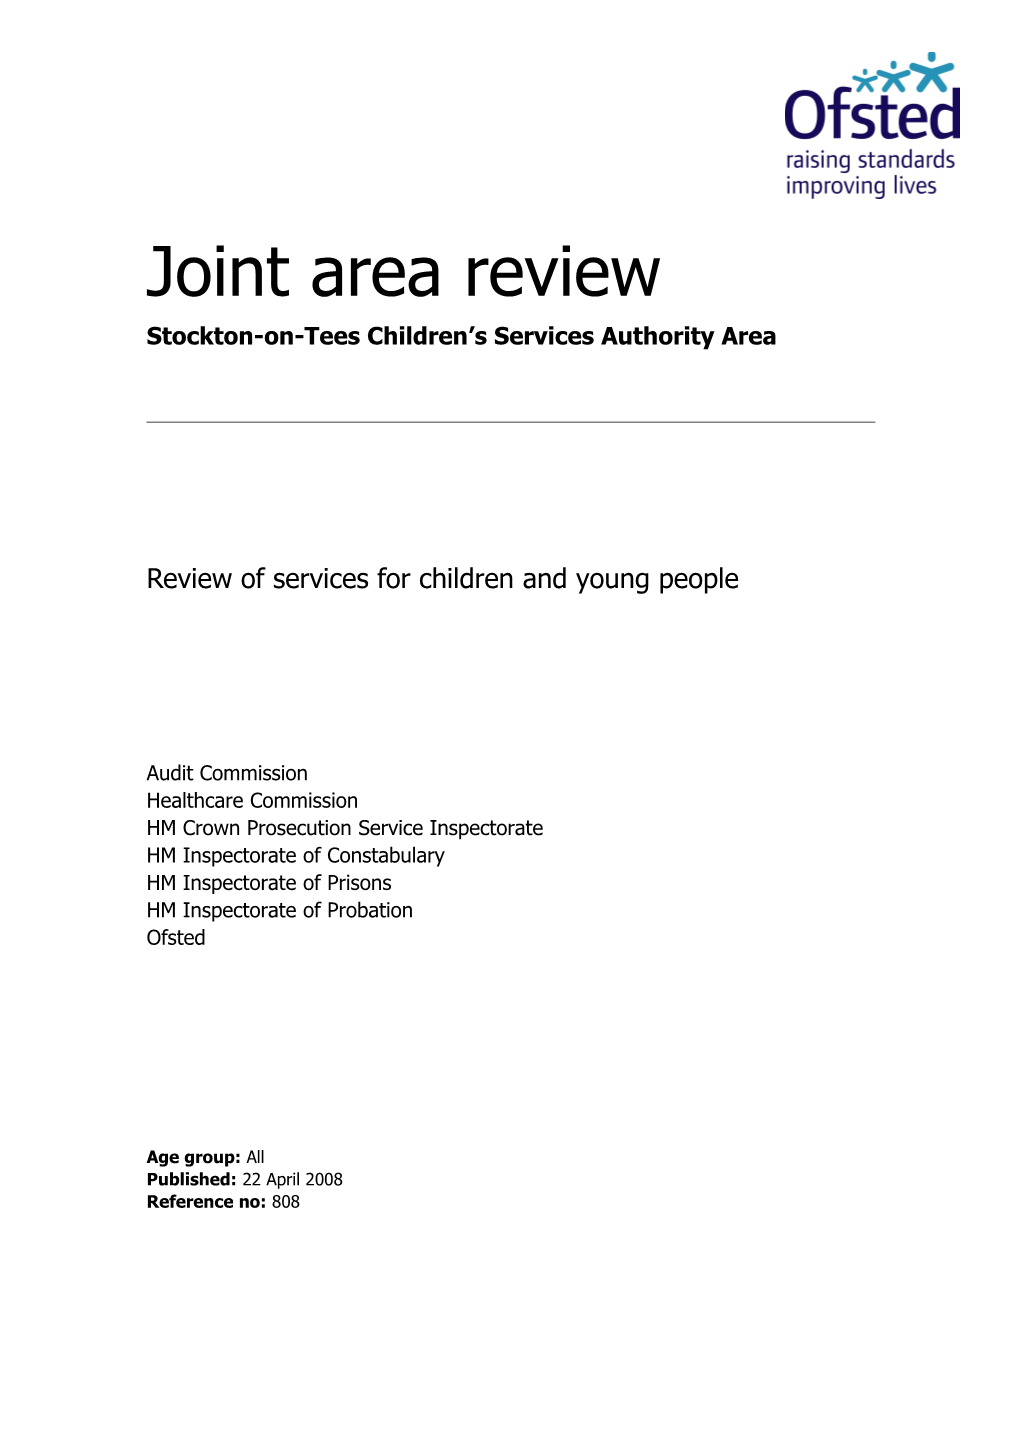 Review of Services for Children and Young People